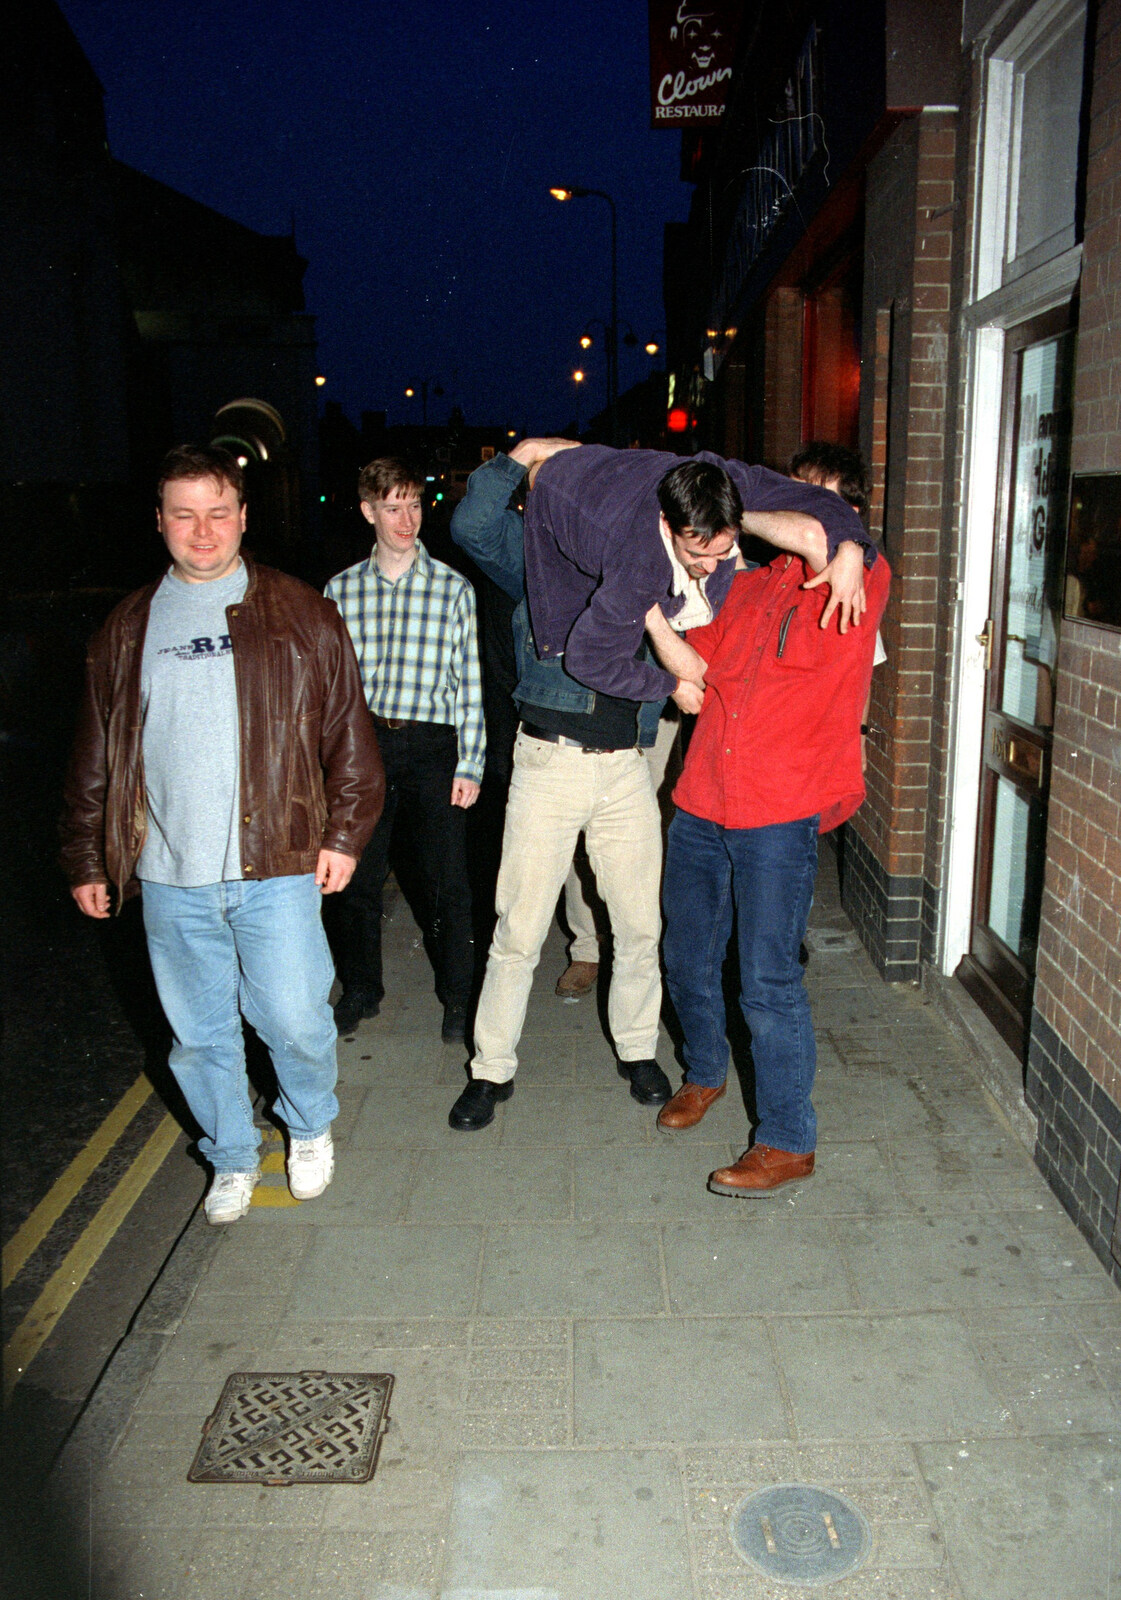 CISU, Los Mexicanos and the Inflatable Woman, Ipswich, Suffolk - 25th April 1996: Trev is carried down the road